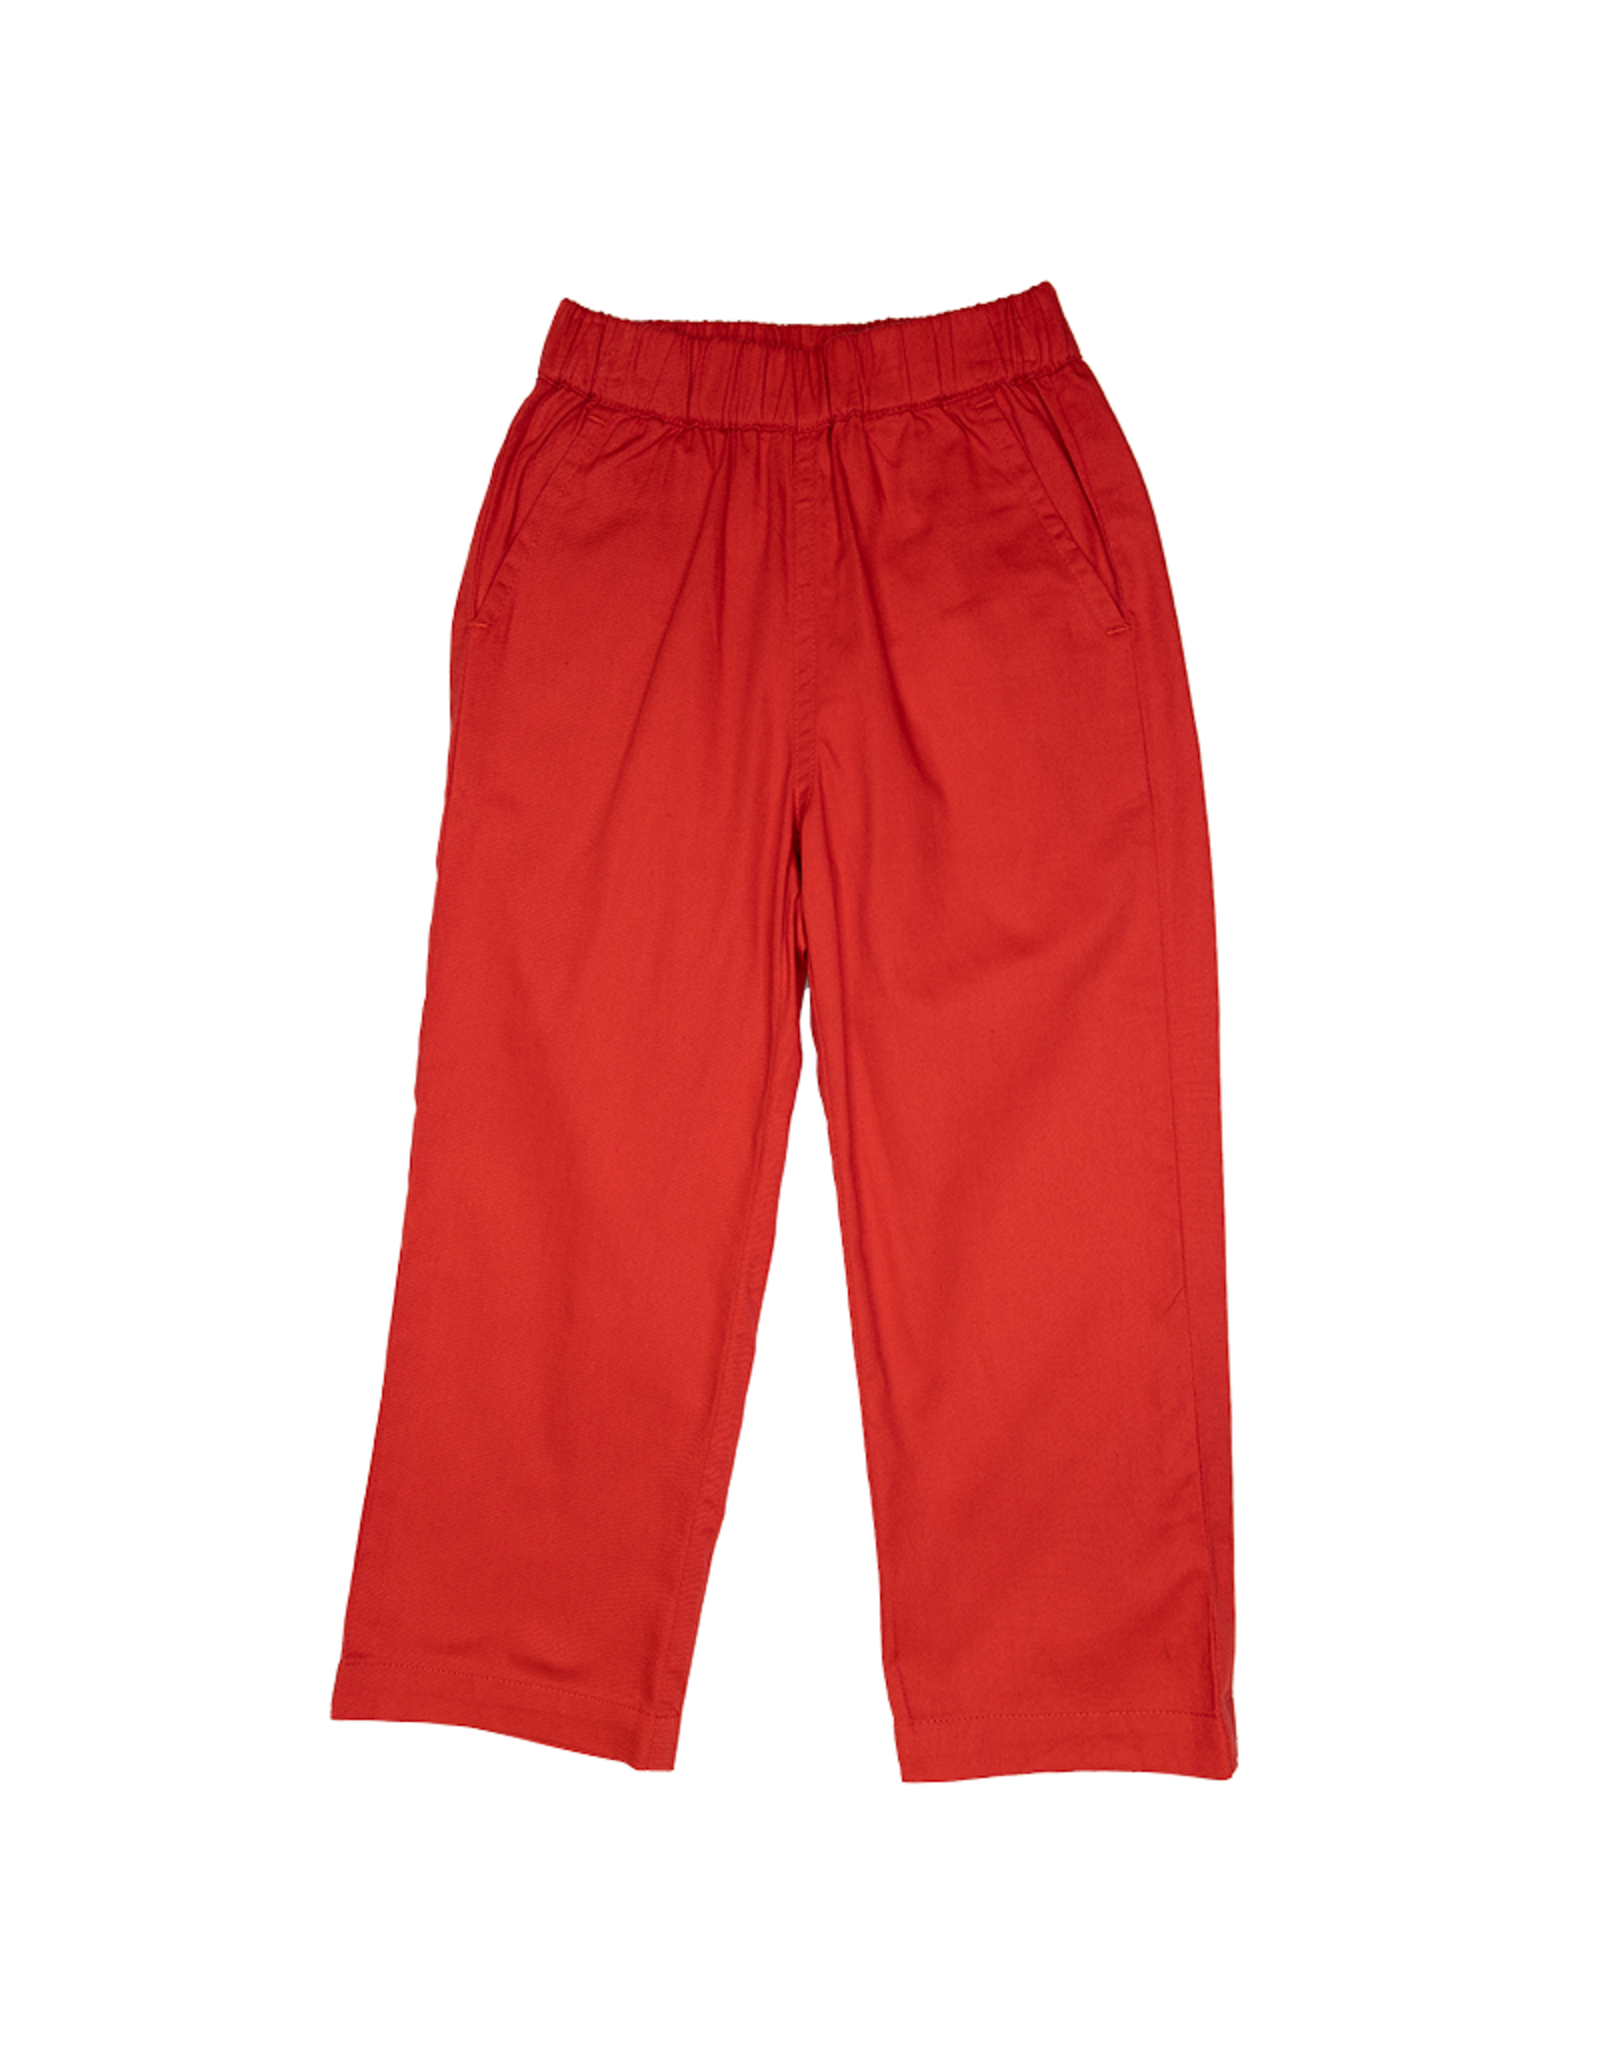 South Bound SBound Elastic Pants 3208 Red